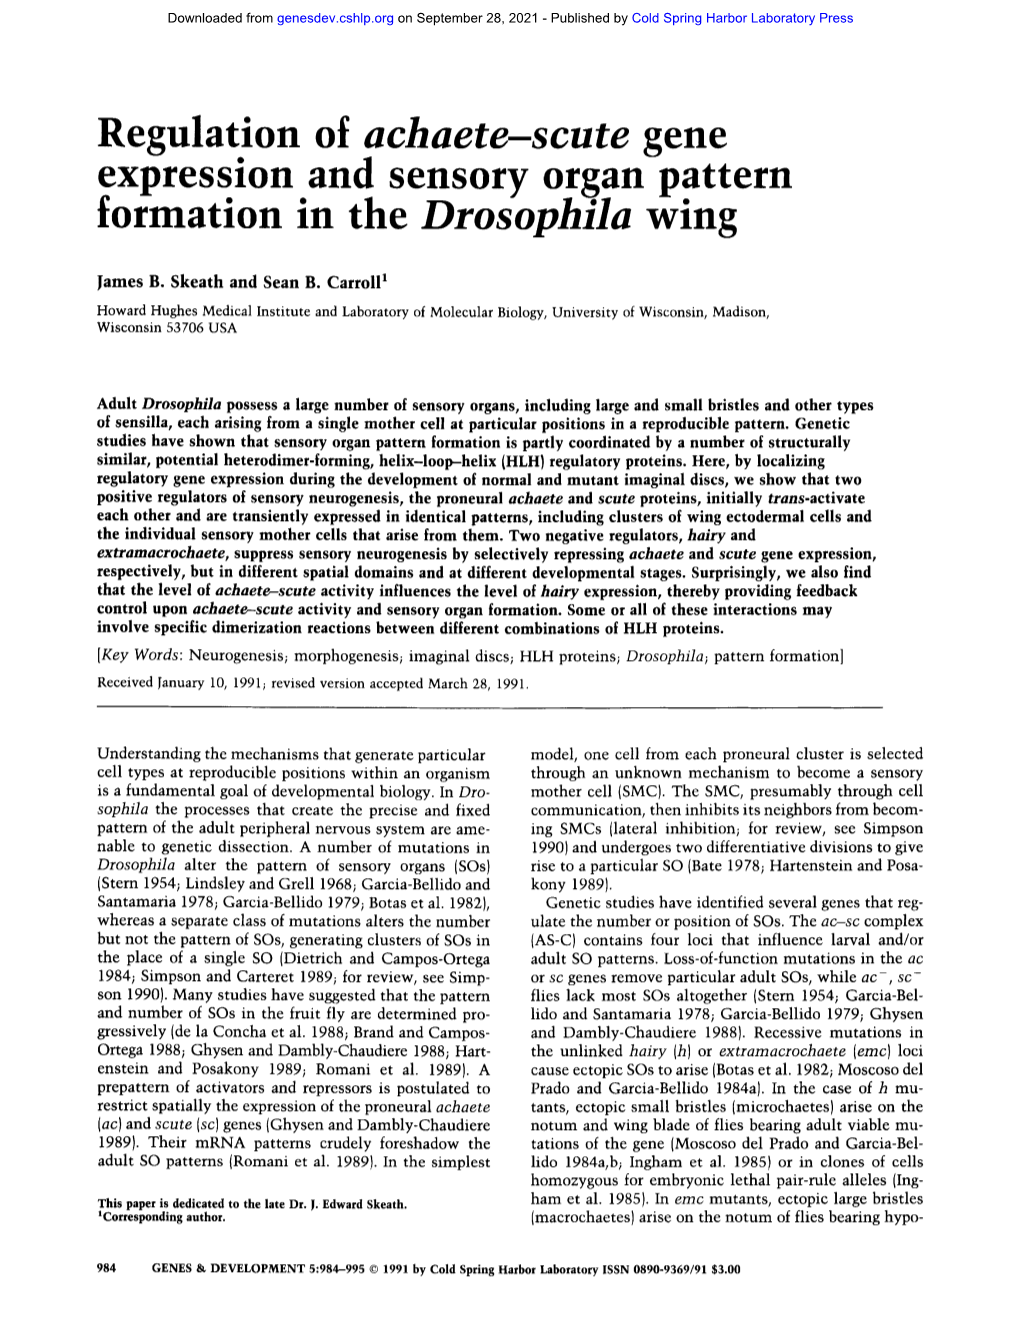 Regulation of Achaete-Scute Gene Expression and Sensory Organ Pattern Formation in the Drosophila Wing